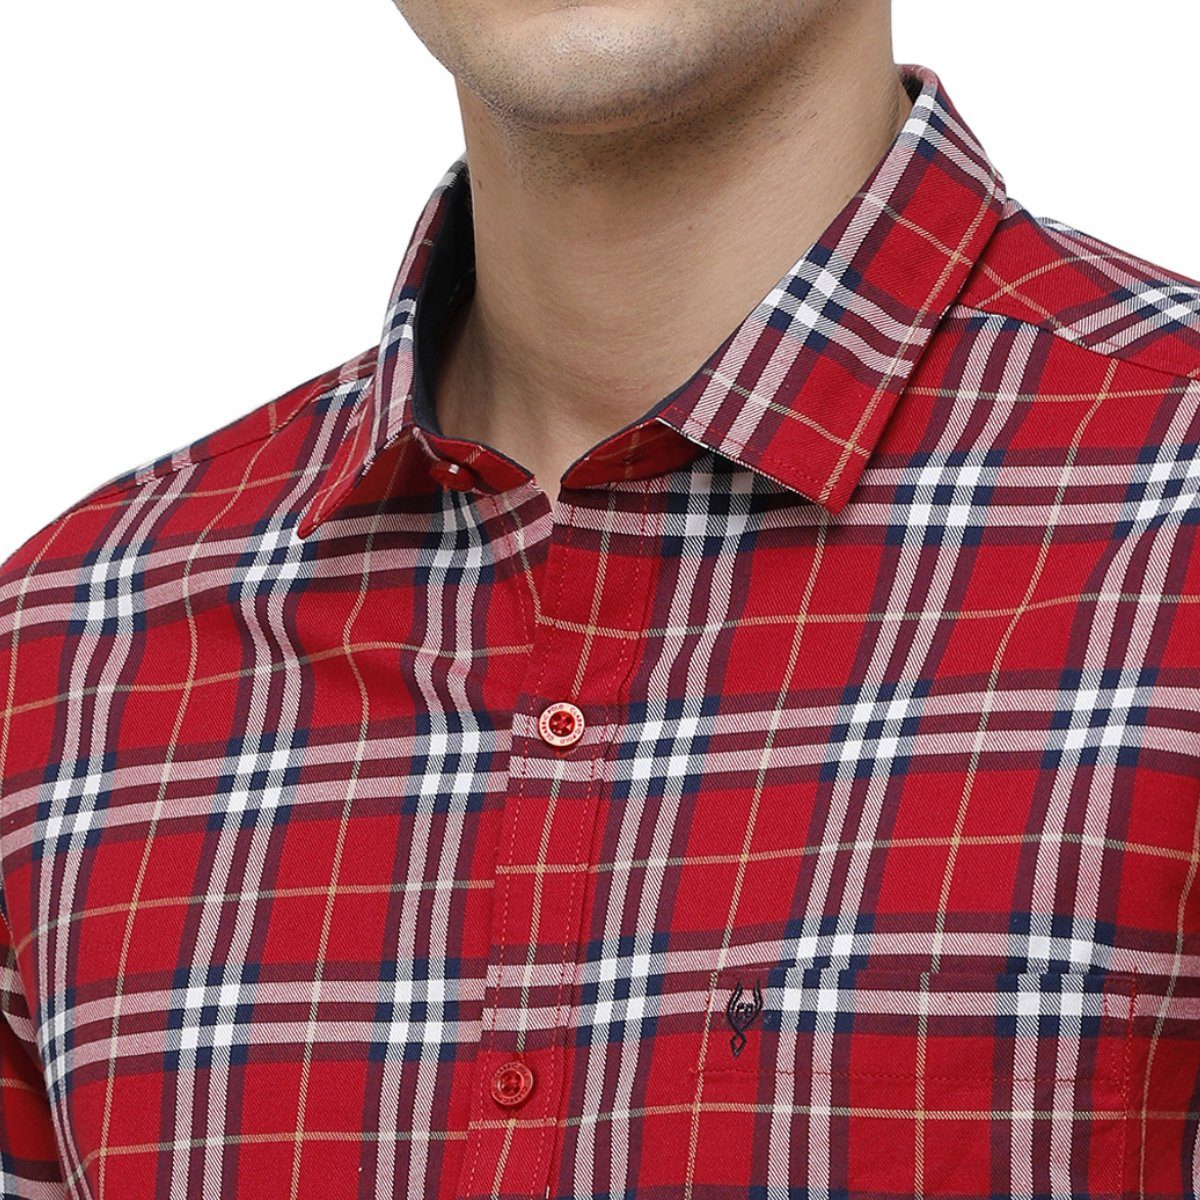 Classic Polo Mens Collar Neck Full Sleeve Red Smart Fit 100% Cotton Woven Shirt SM1-71 A-FS-CHK-SF Shirts Swiss Club 